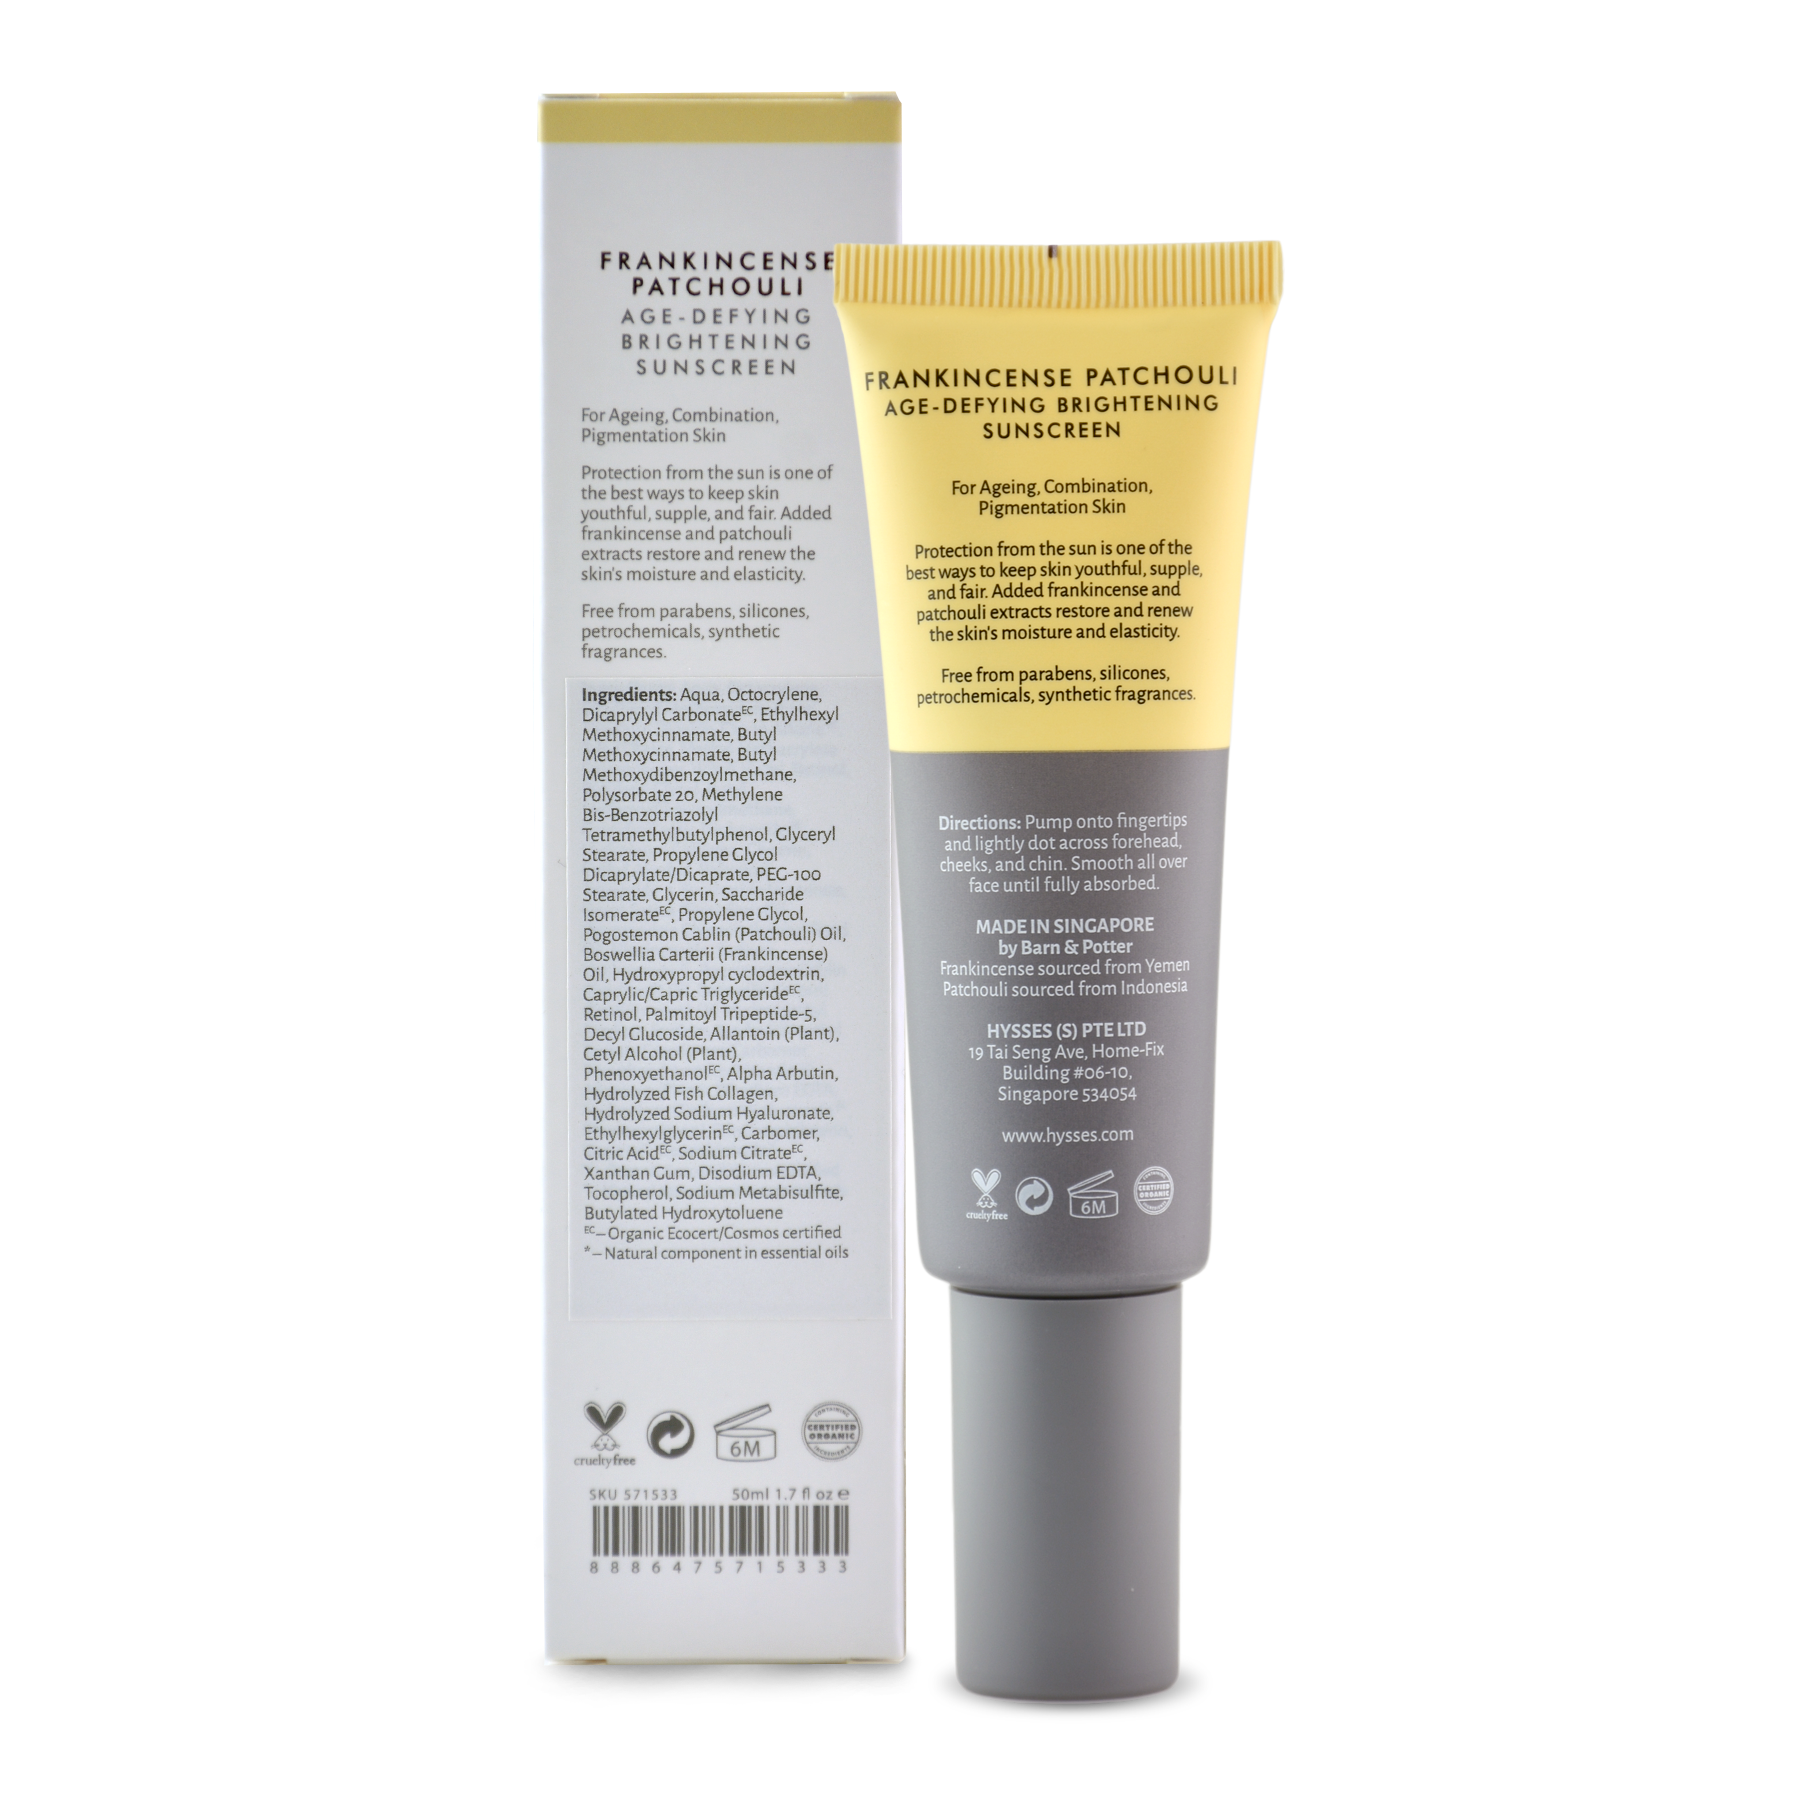 Age Defying Brightening Sunscreen Frankincense Patchouli SPF 40 / PA++ - HYSSES